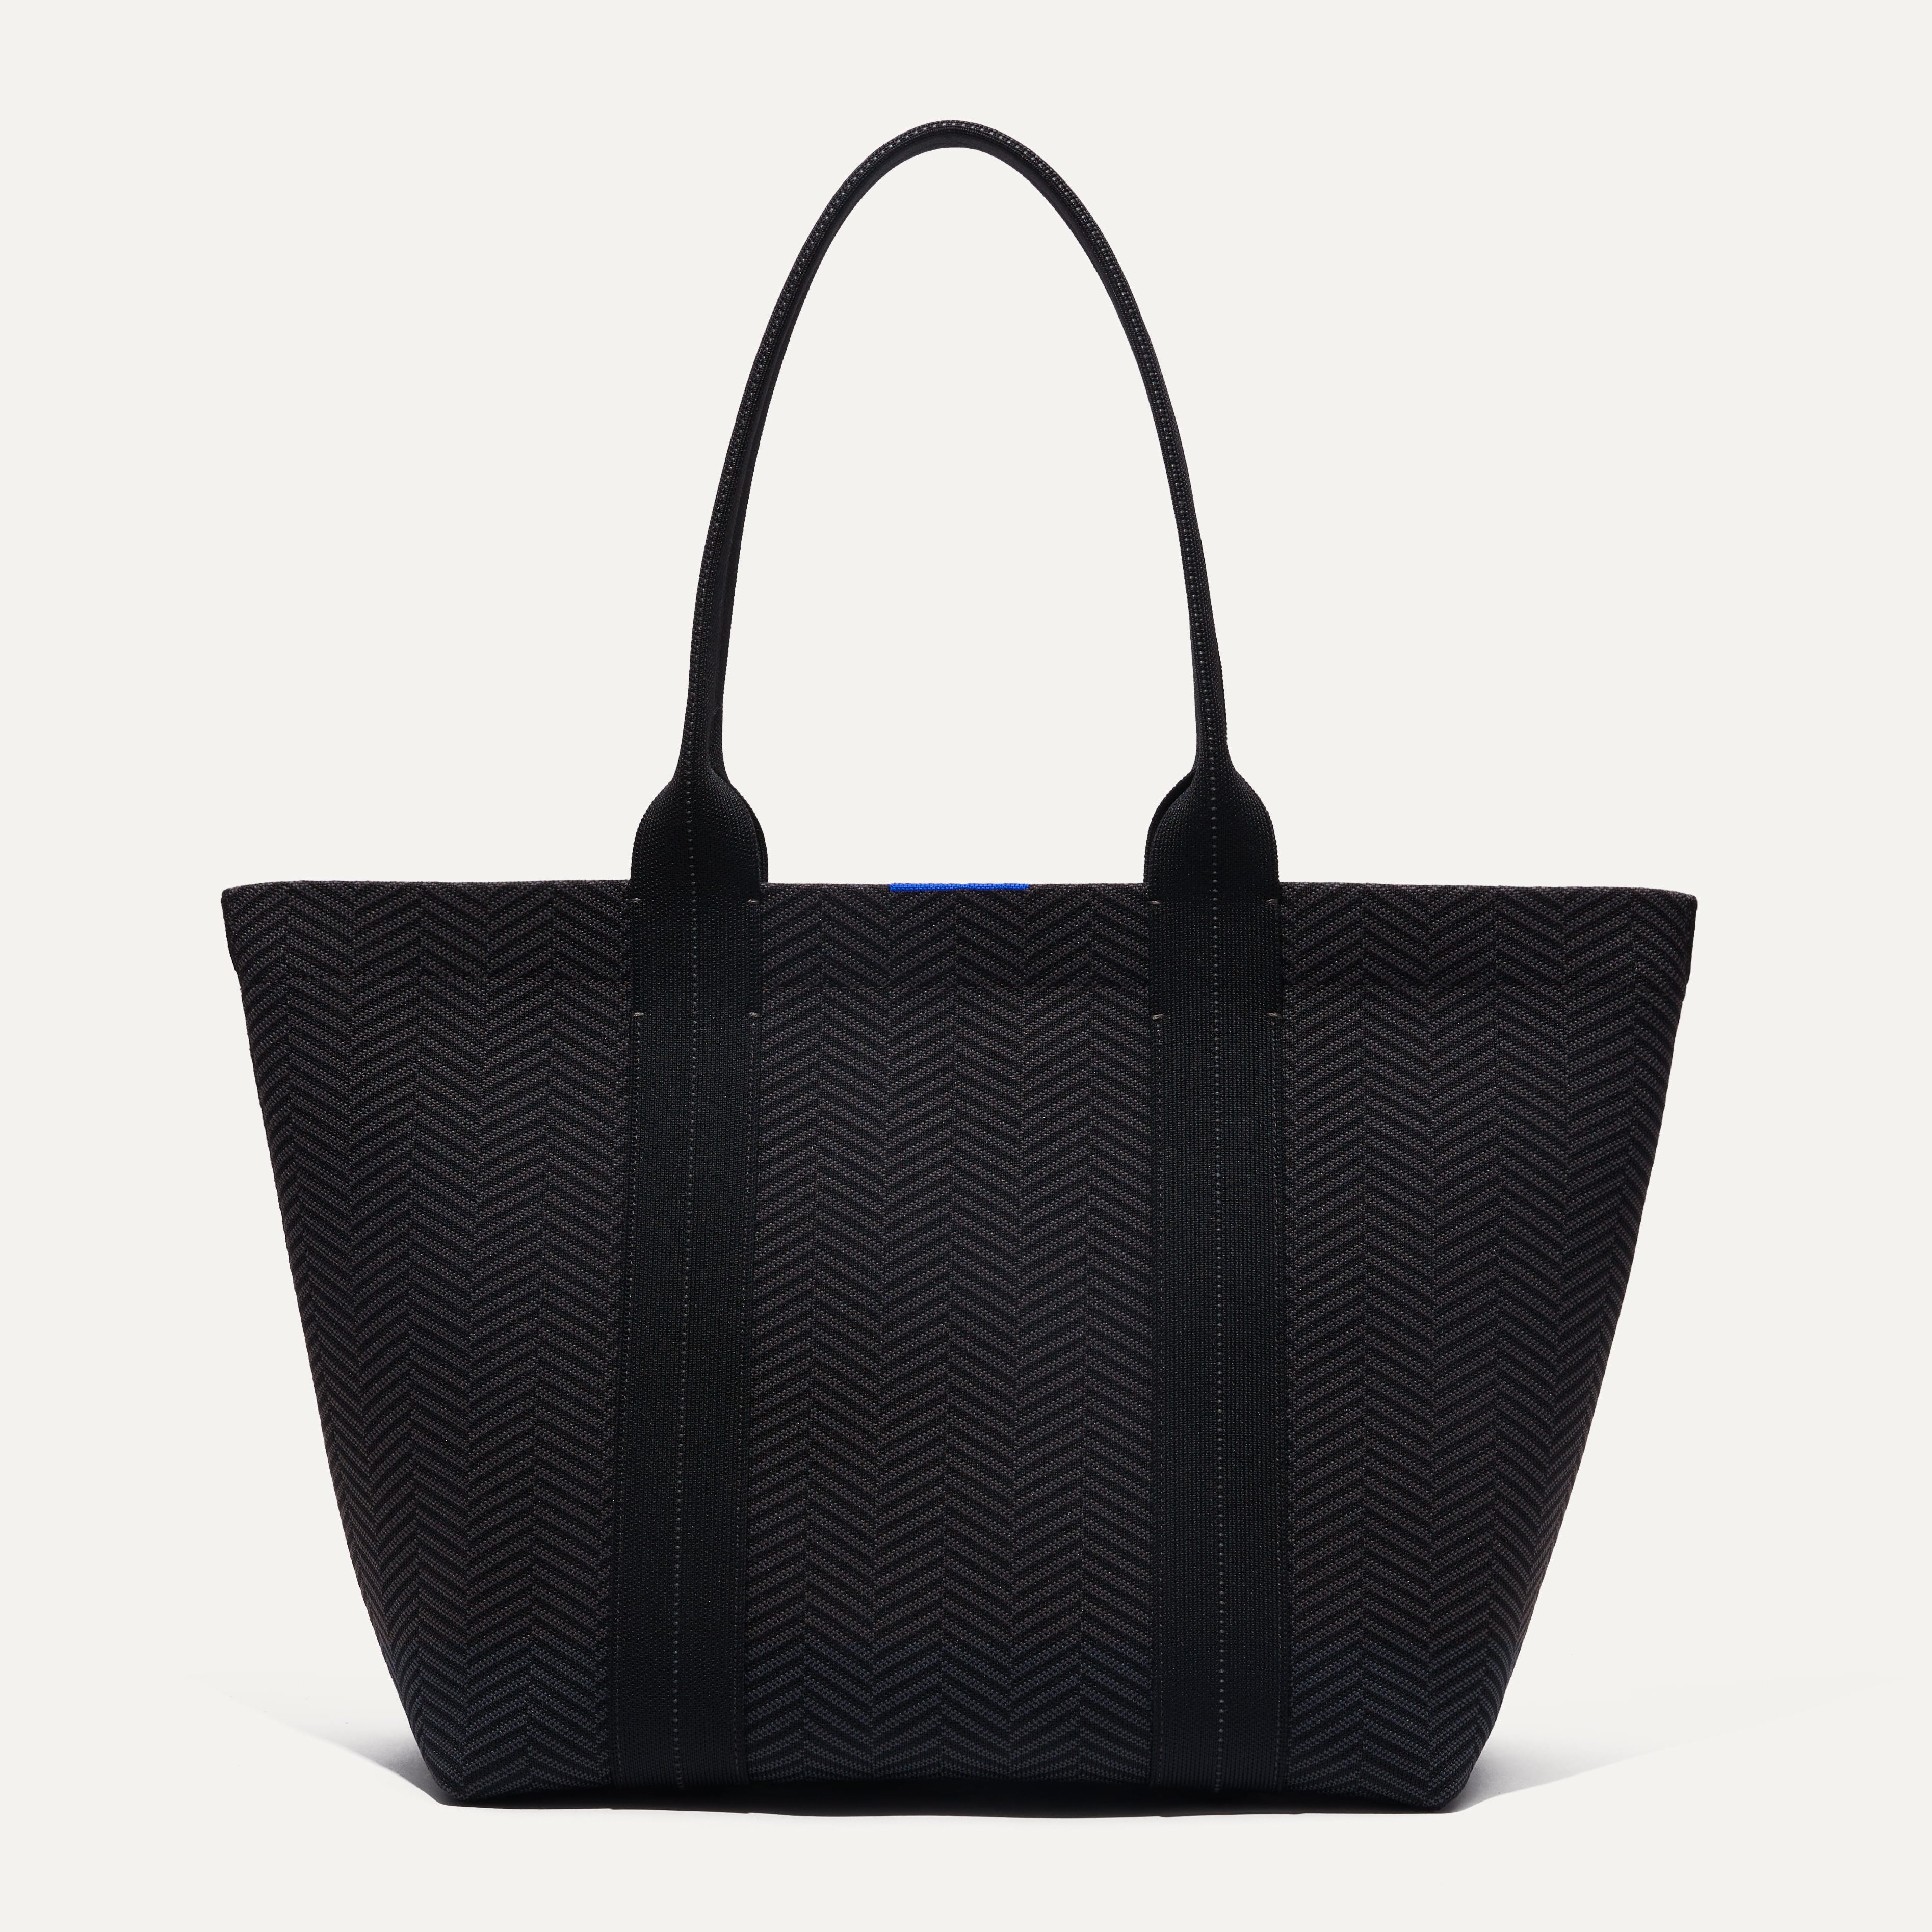 The Essential Tote in Shadow Black | Bags & Accessories | Rothy's